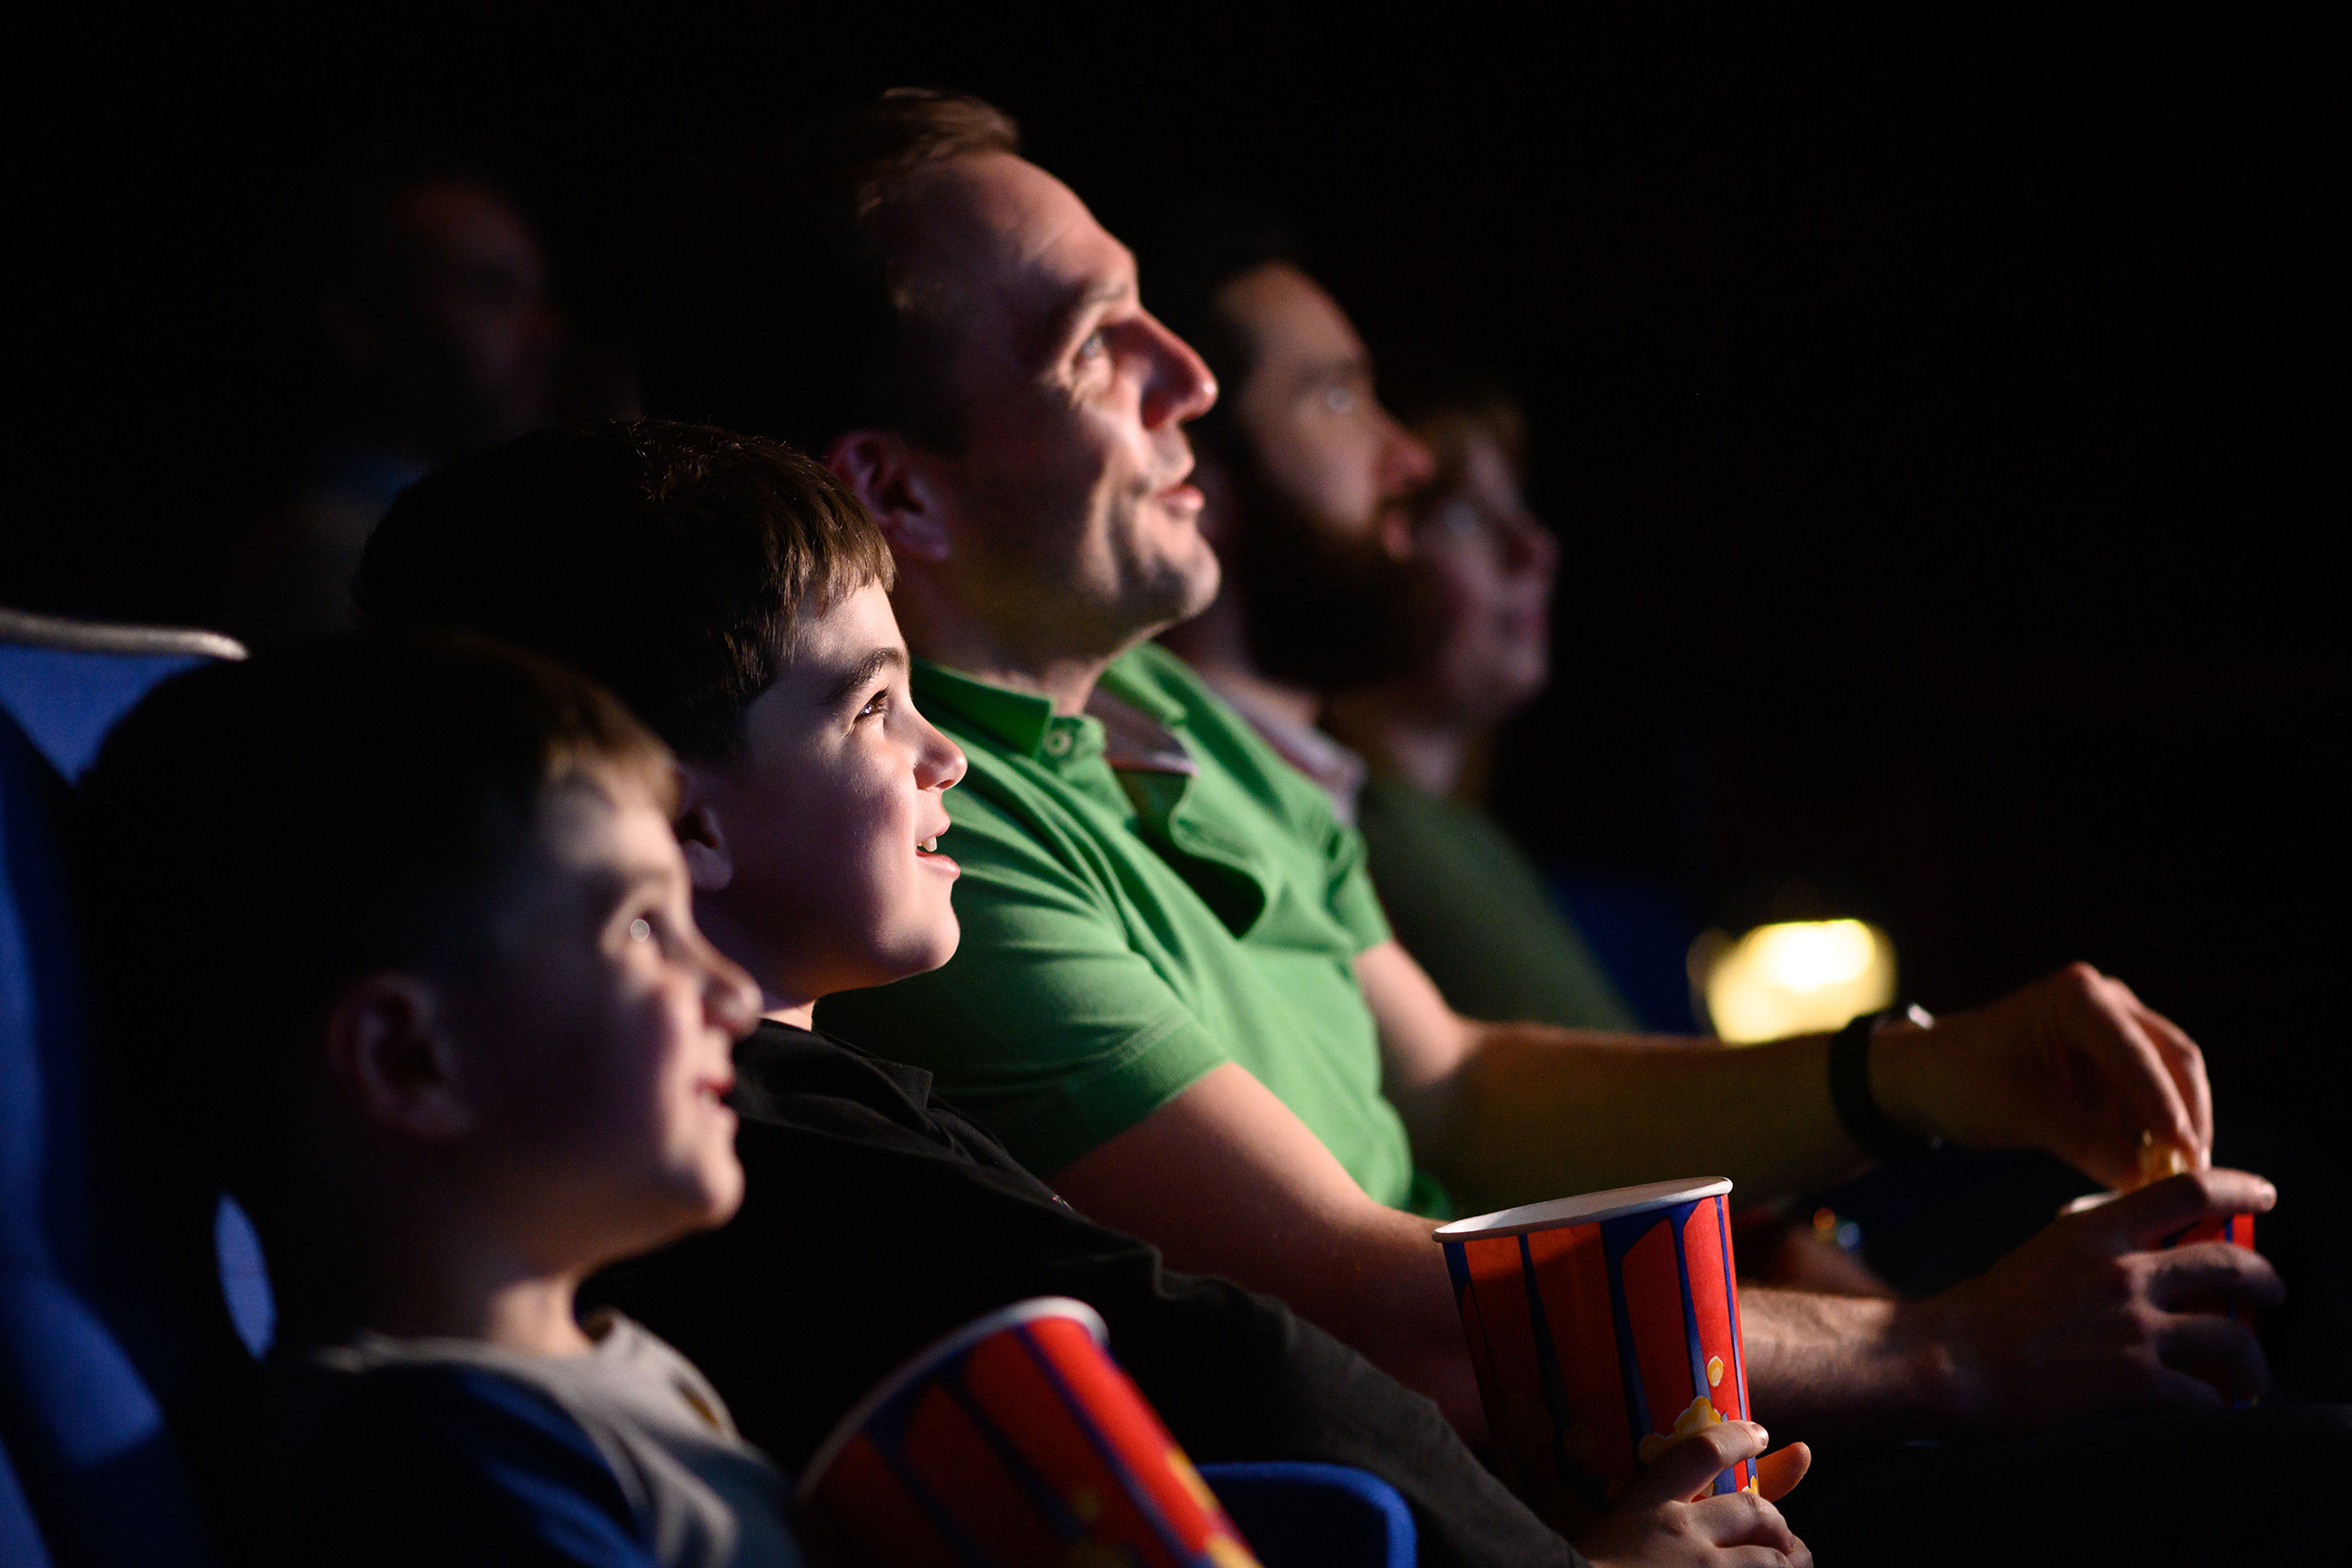 A group of children and adults watching a film, their happy faces illuminated by the screen